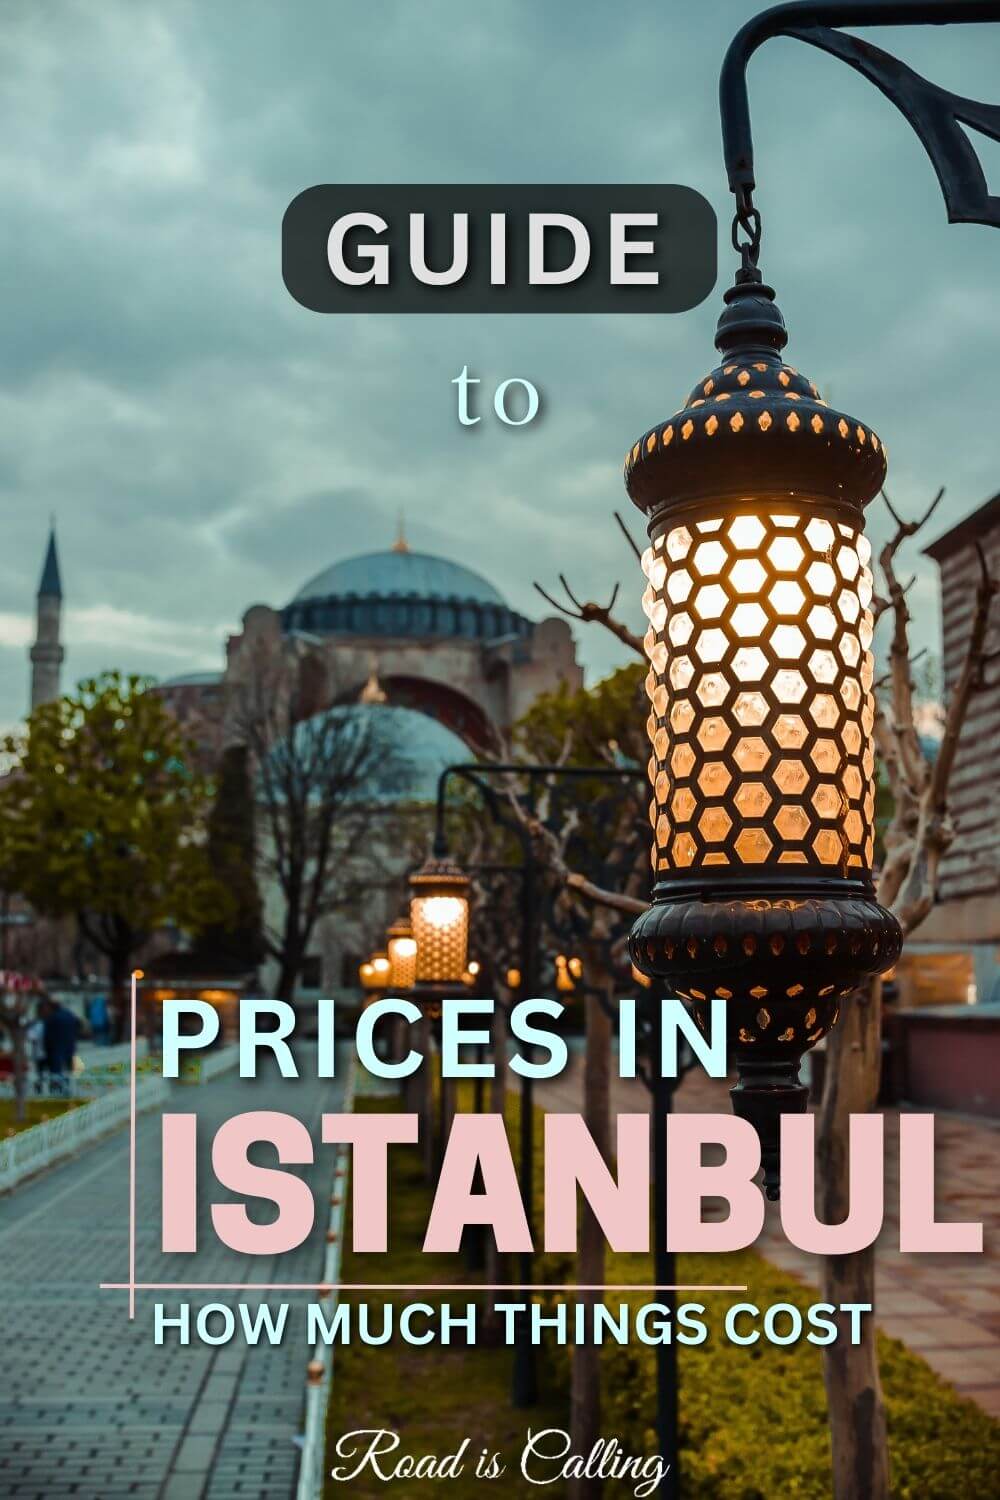 Prices in Istanbul